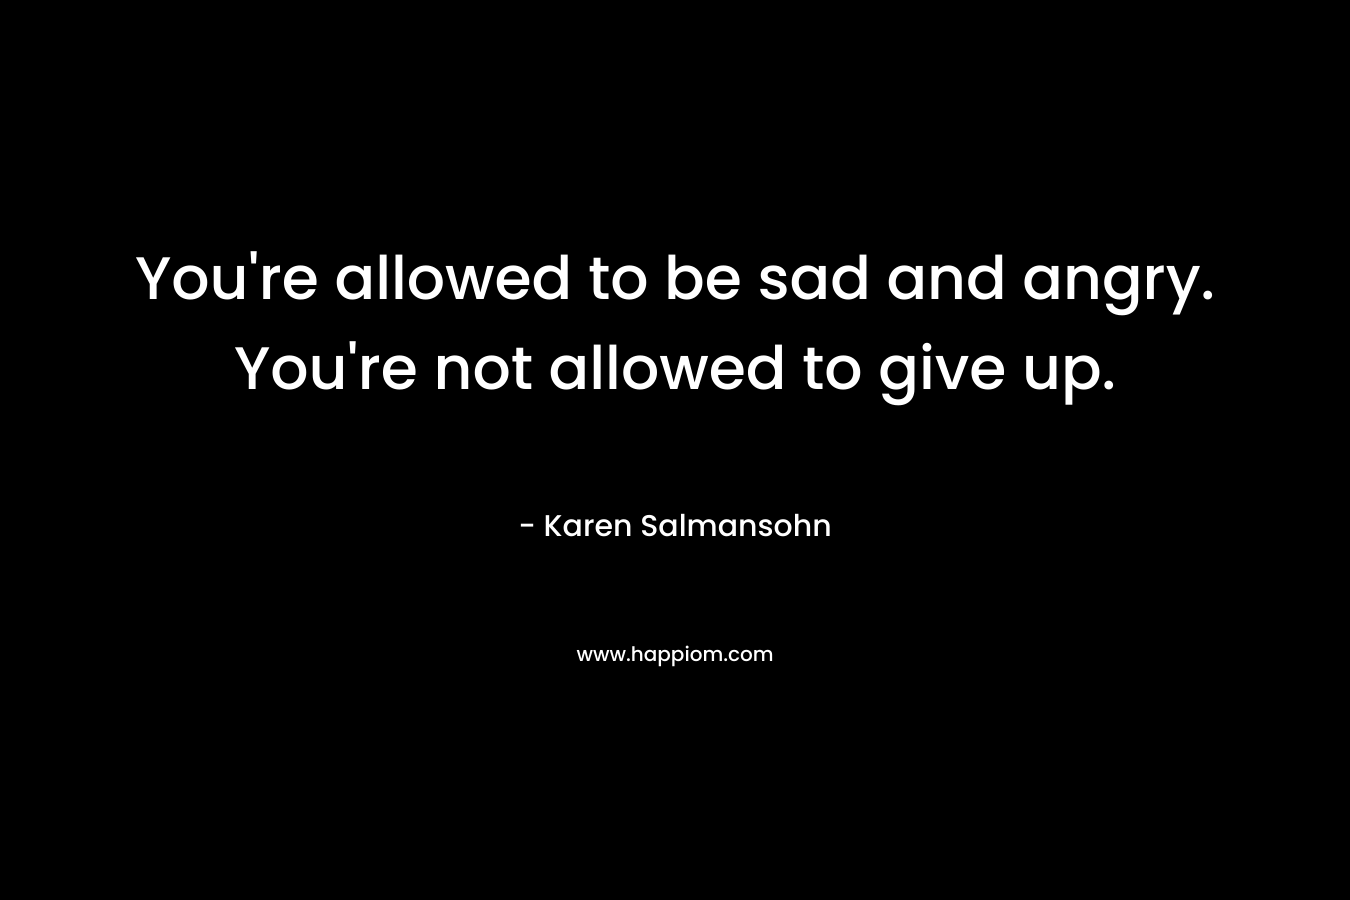 You're allowed to be sad and angry. You're not allowed to give up.